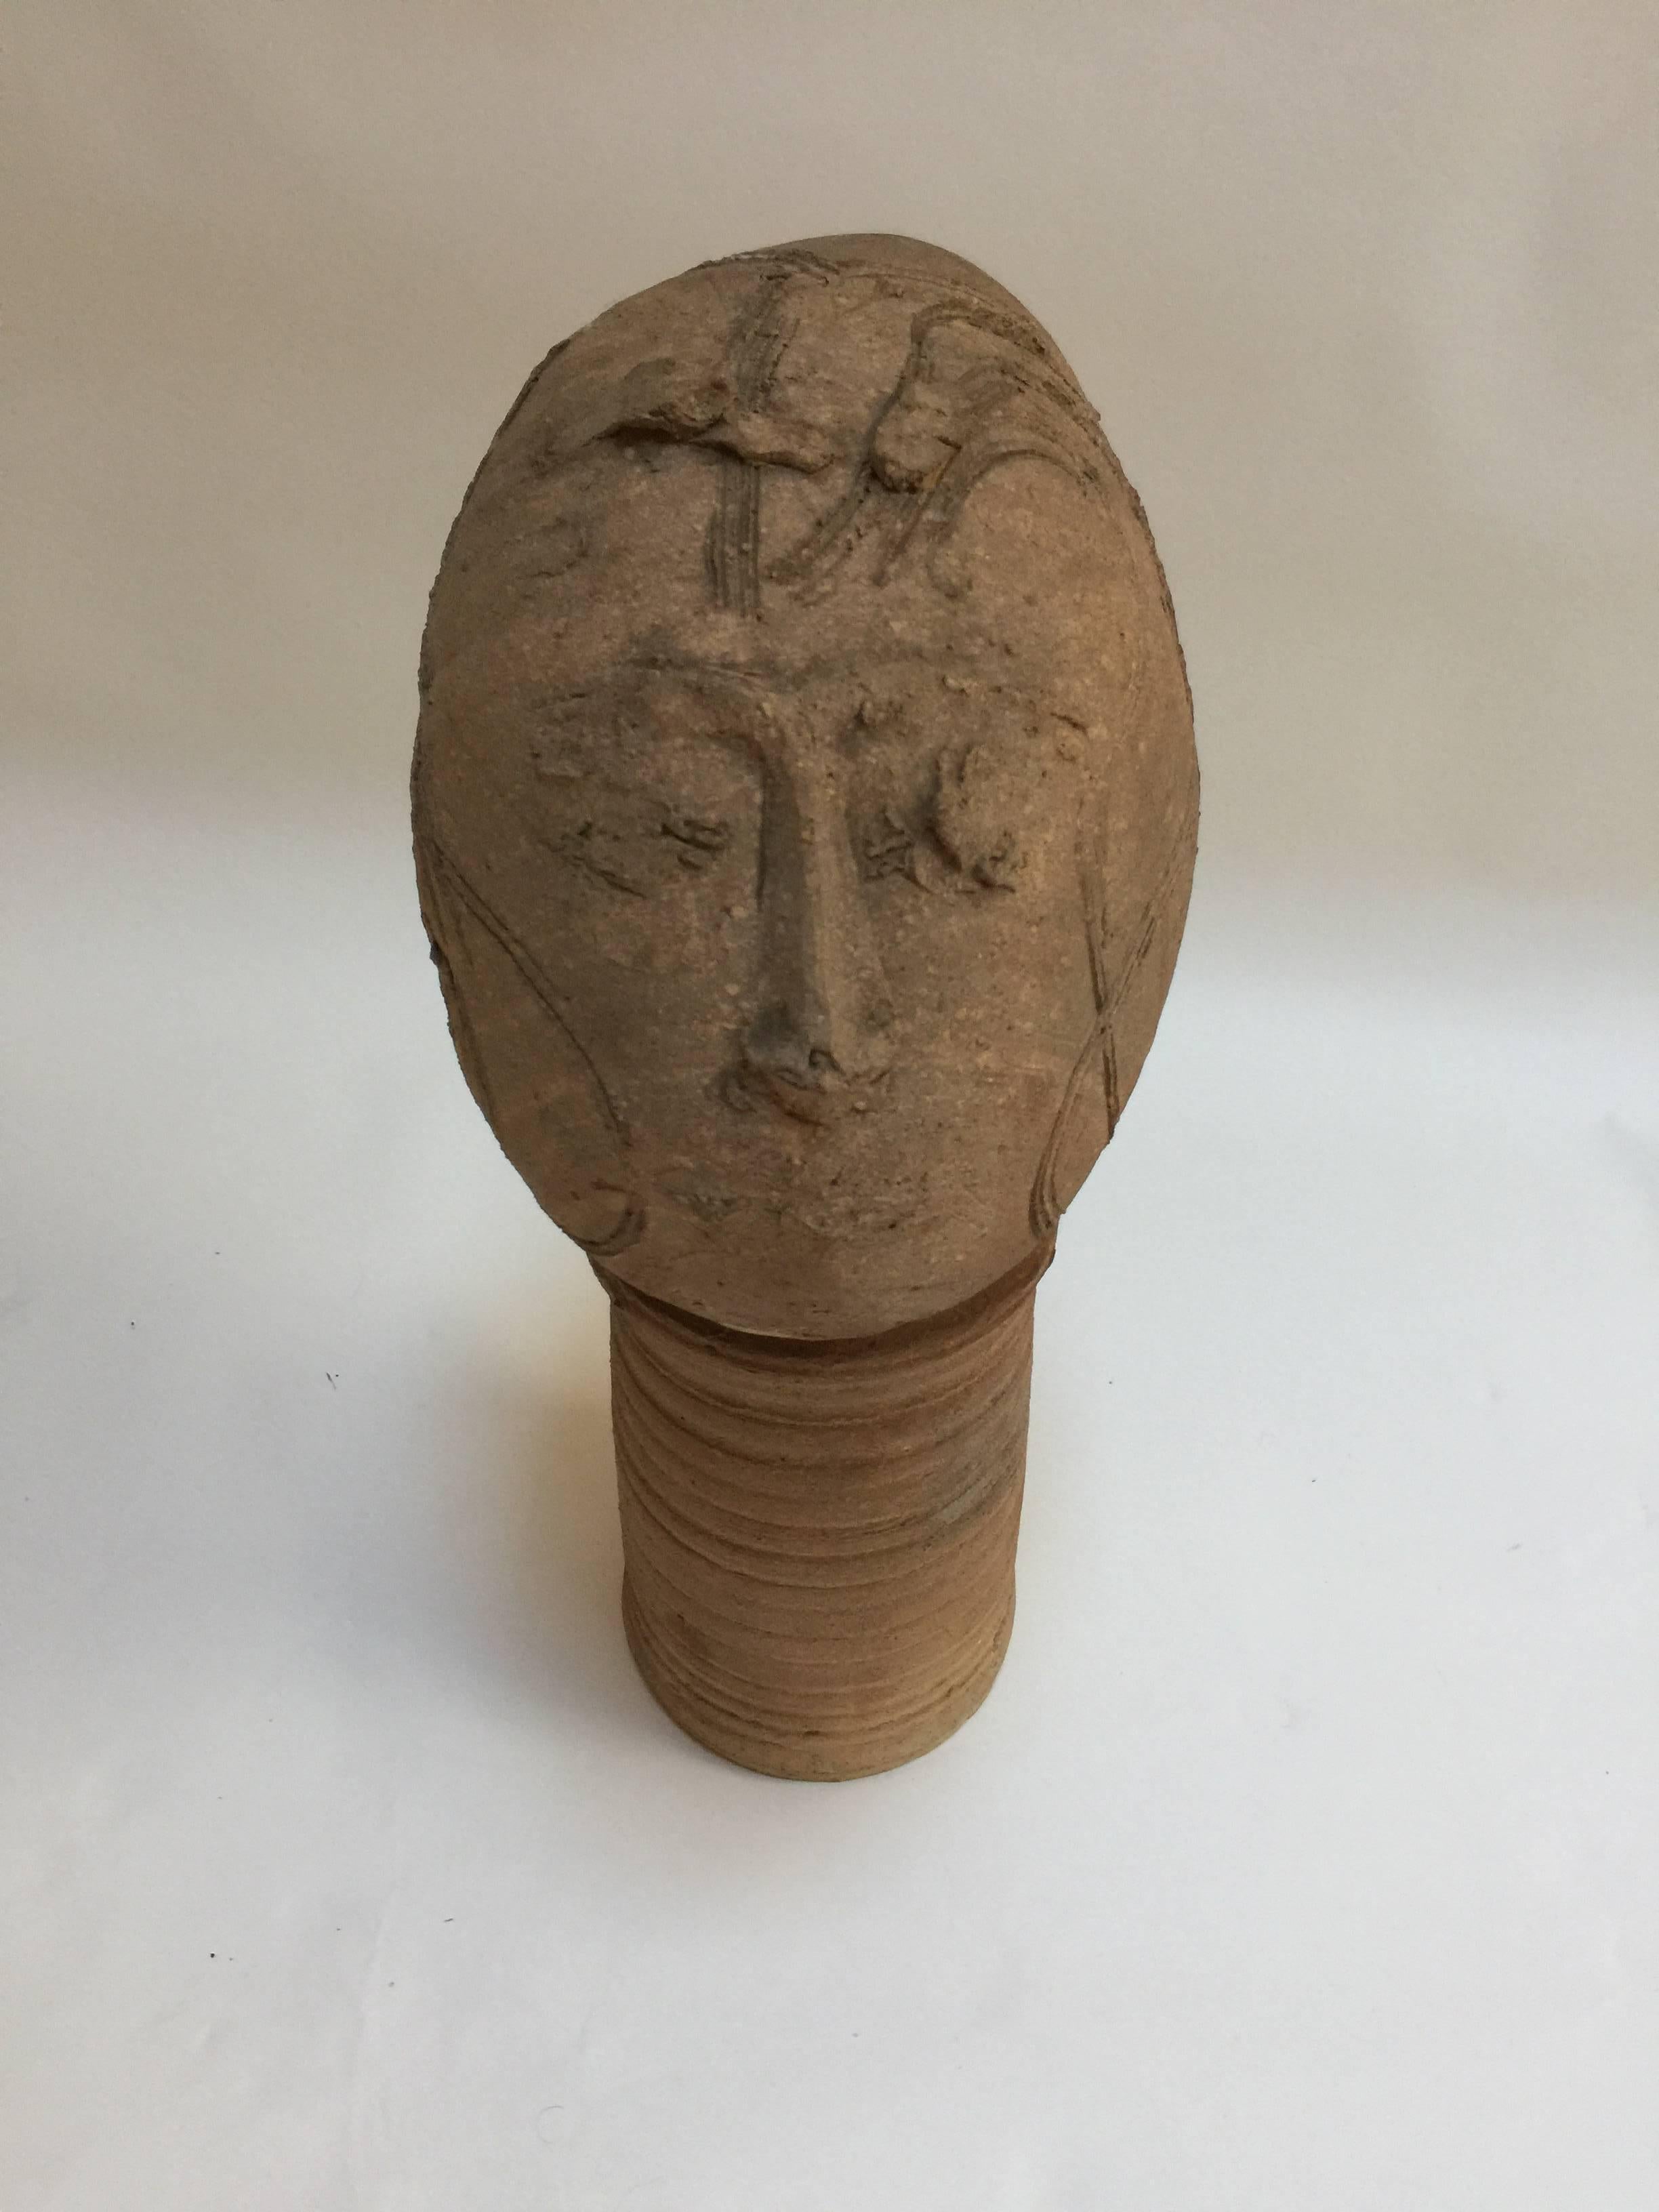 This 1950s pottery head sculpture came out of a professor's estate in Florida. No signature found. In fine condition. 20